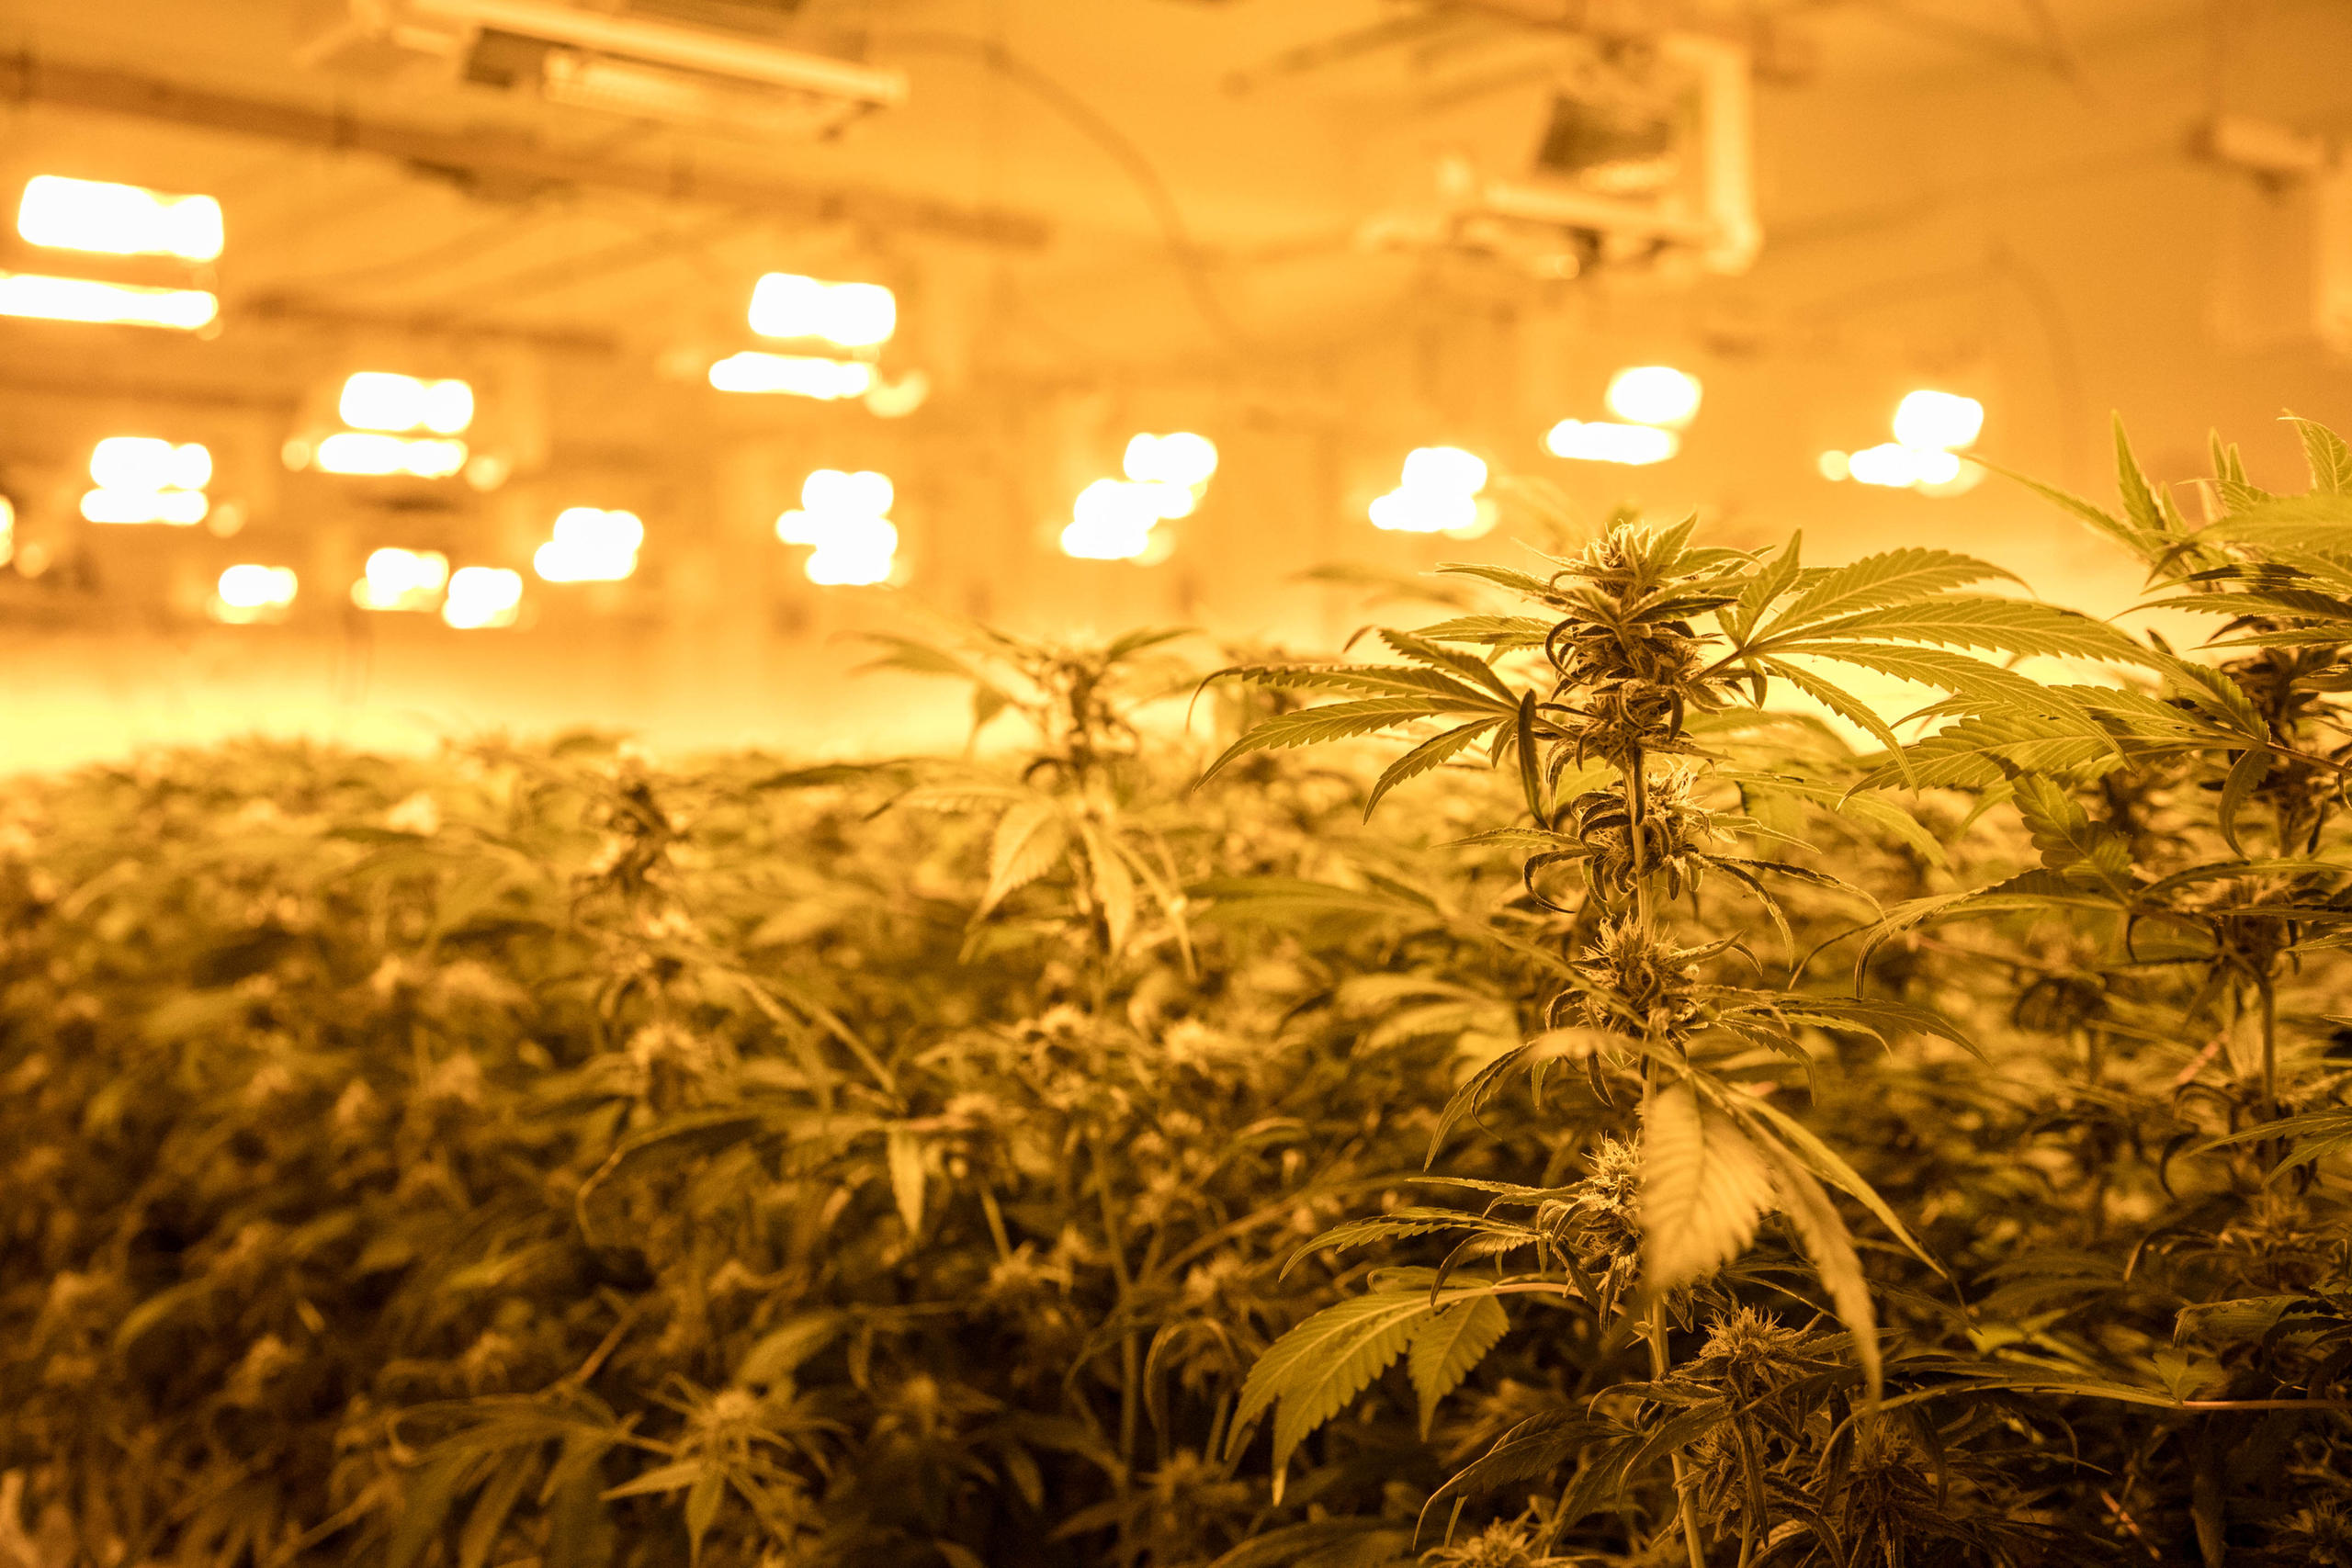 In indoor growing, growth of the cannabis plants is stimulated by powerful lamps